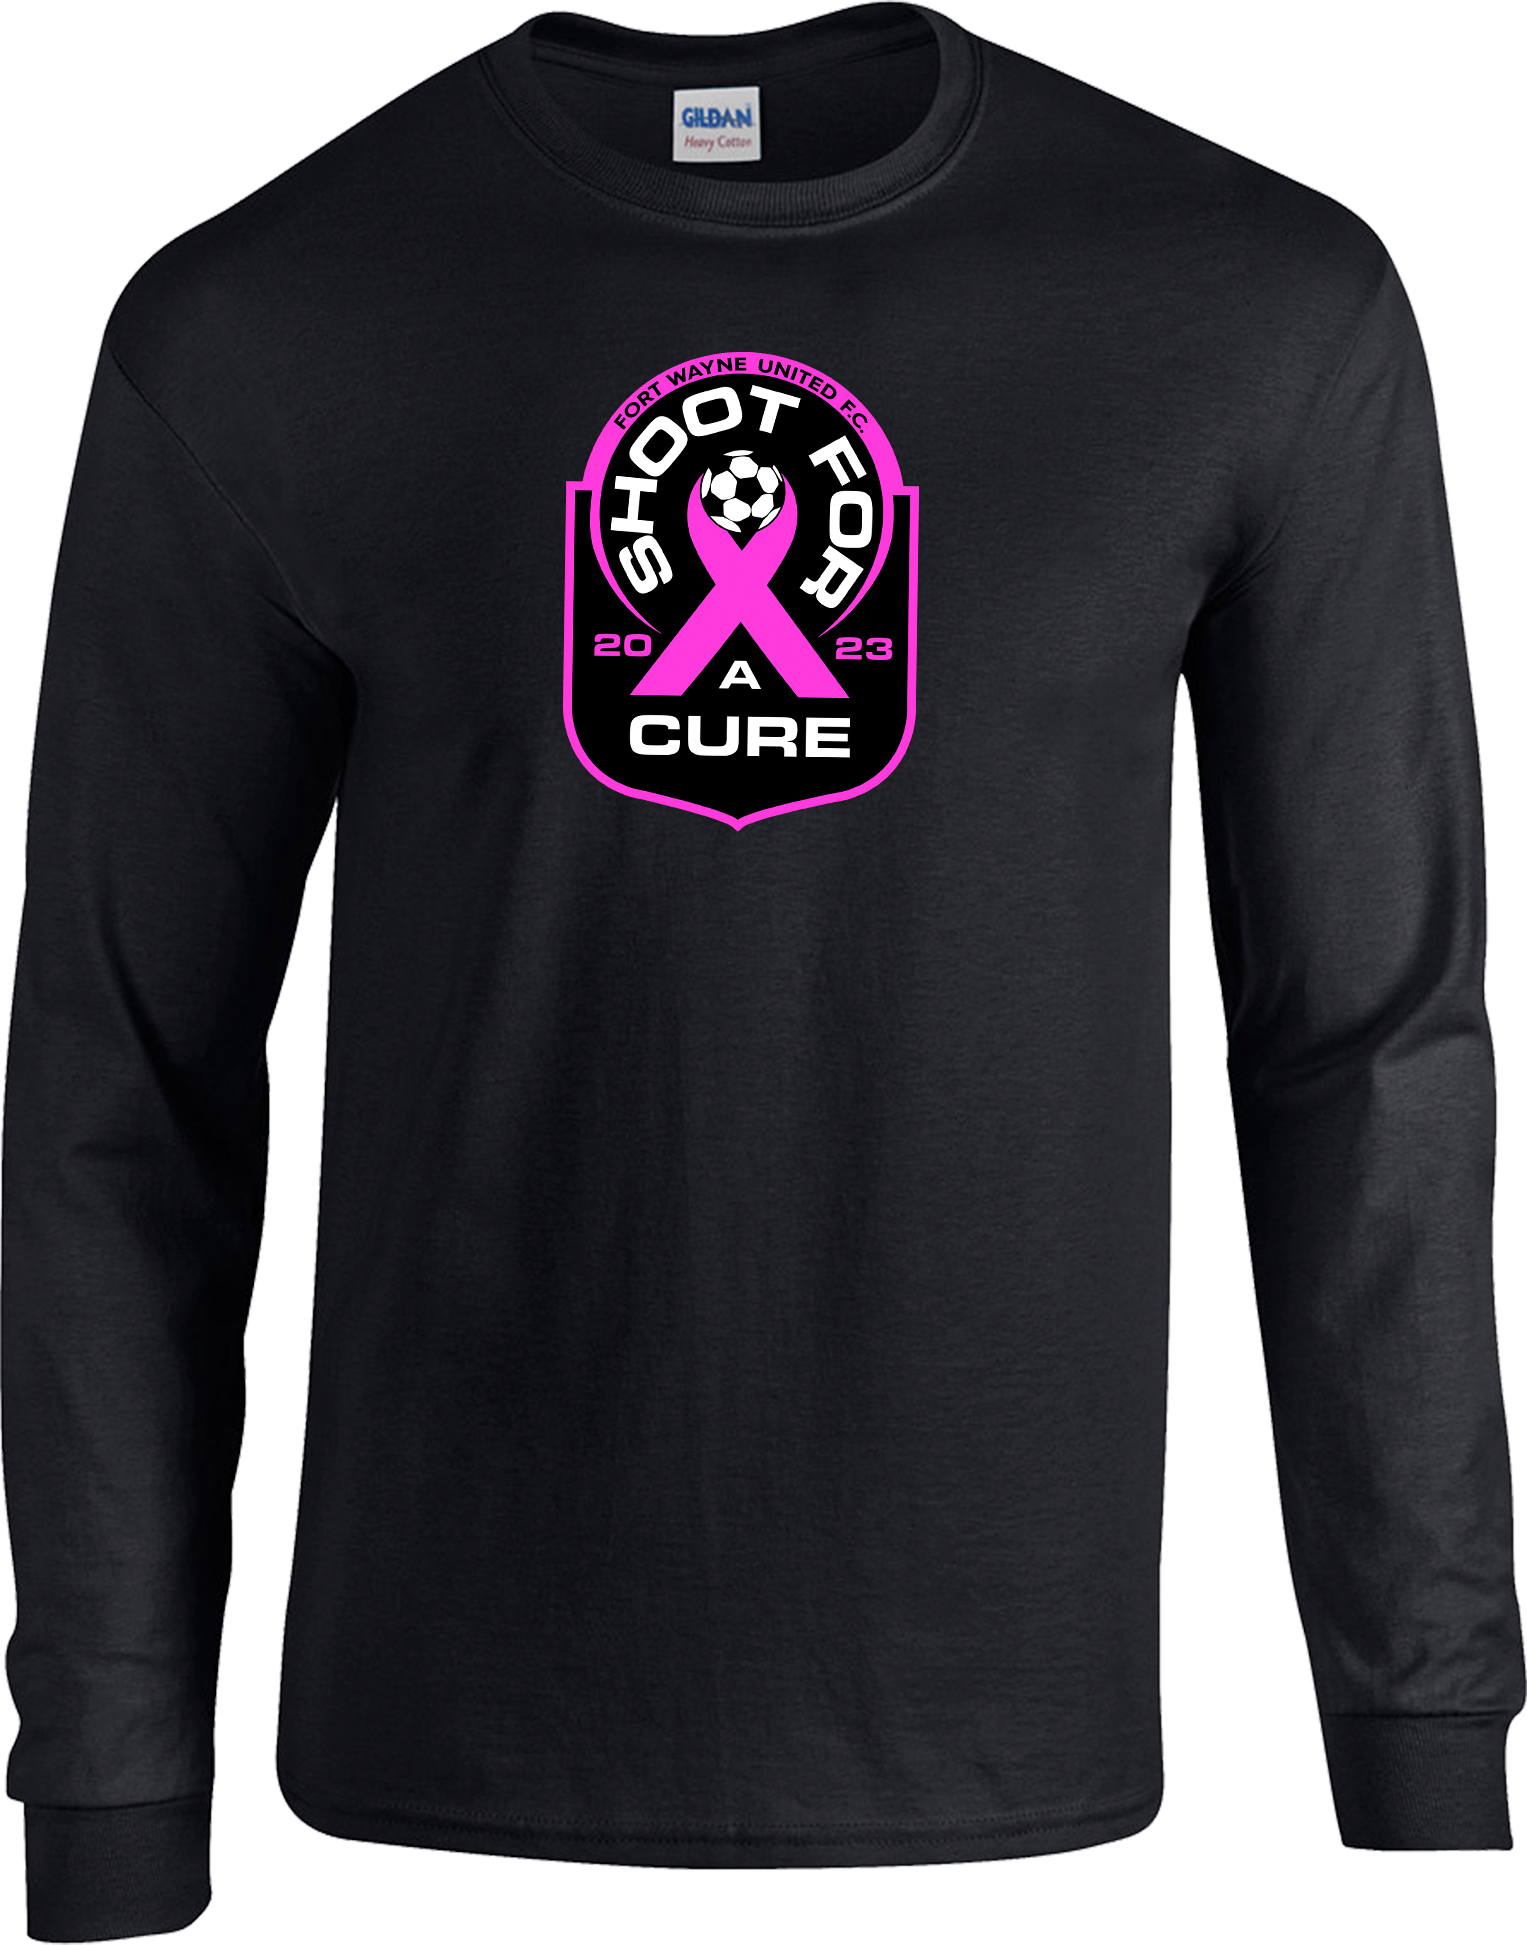 LONG SLEEVES - 2023 Shoot For A Cure